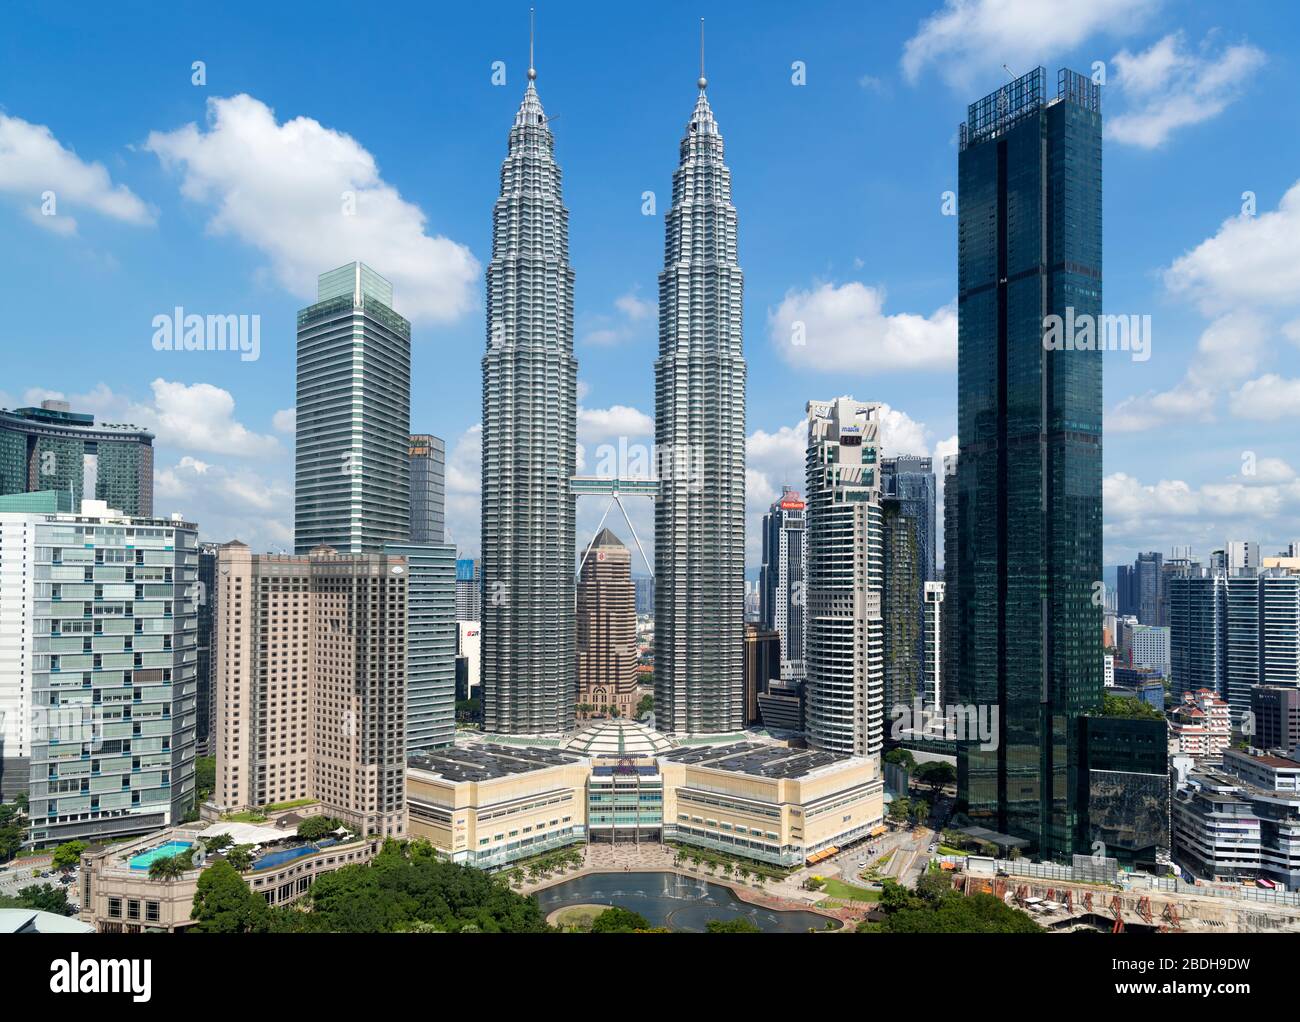 Petronas Twin Towers and downtown skyline with KLCC Park in the foreground, Kuala Lumpur, Malaysia Stock Photo